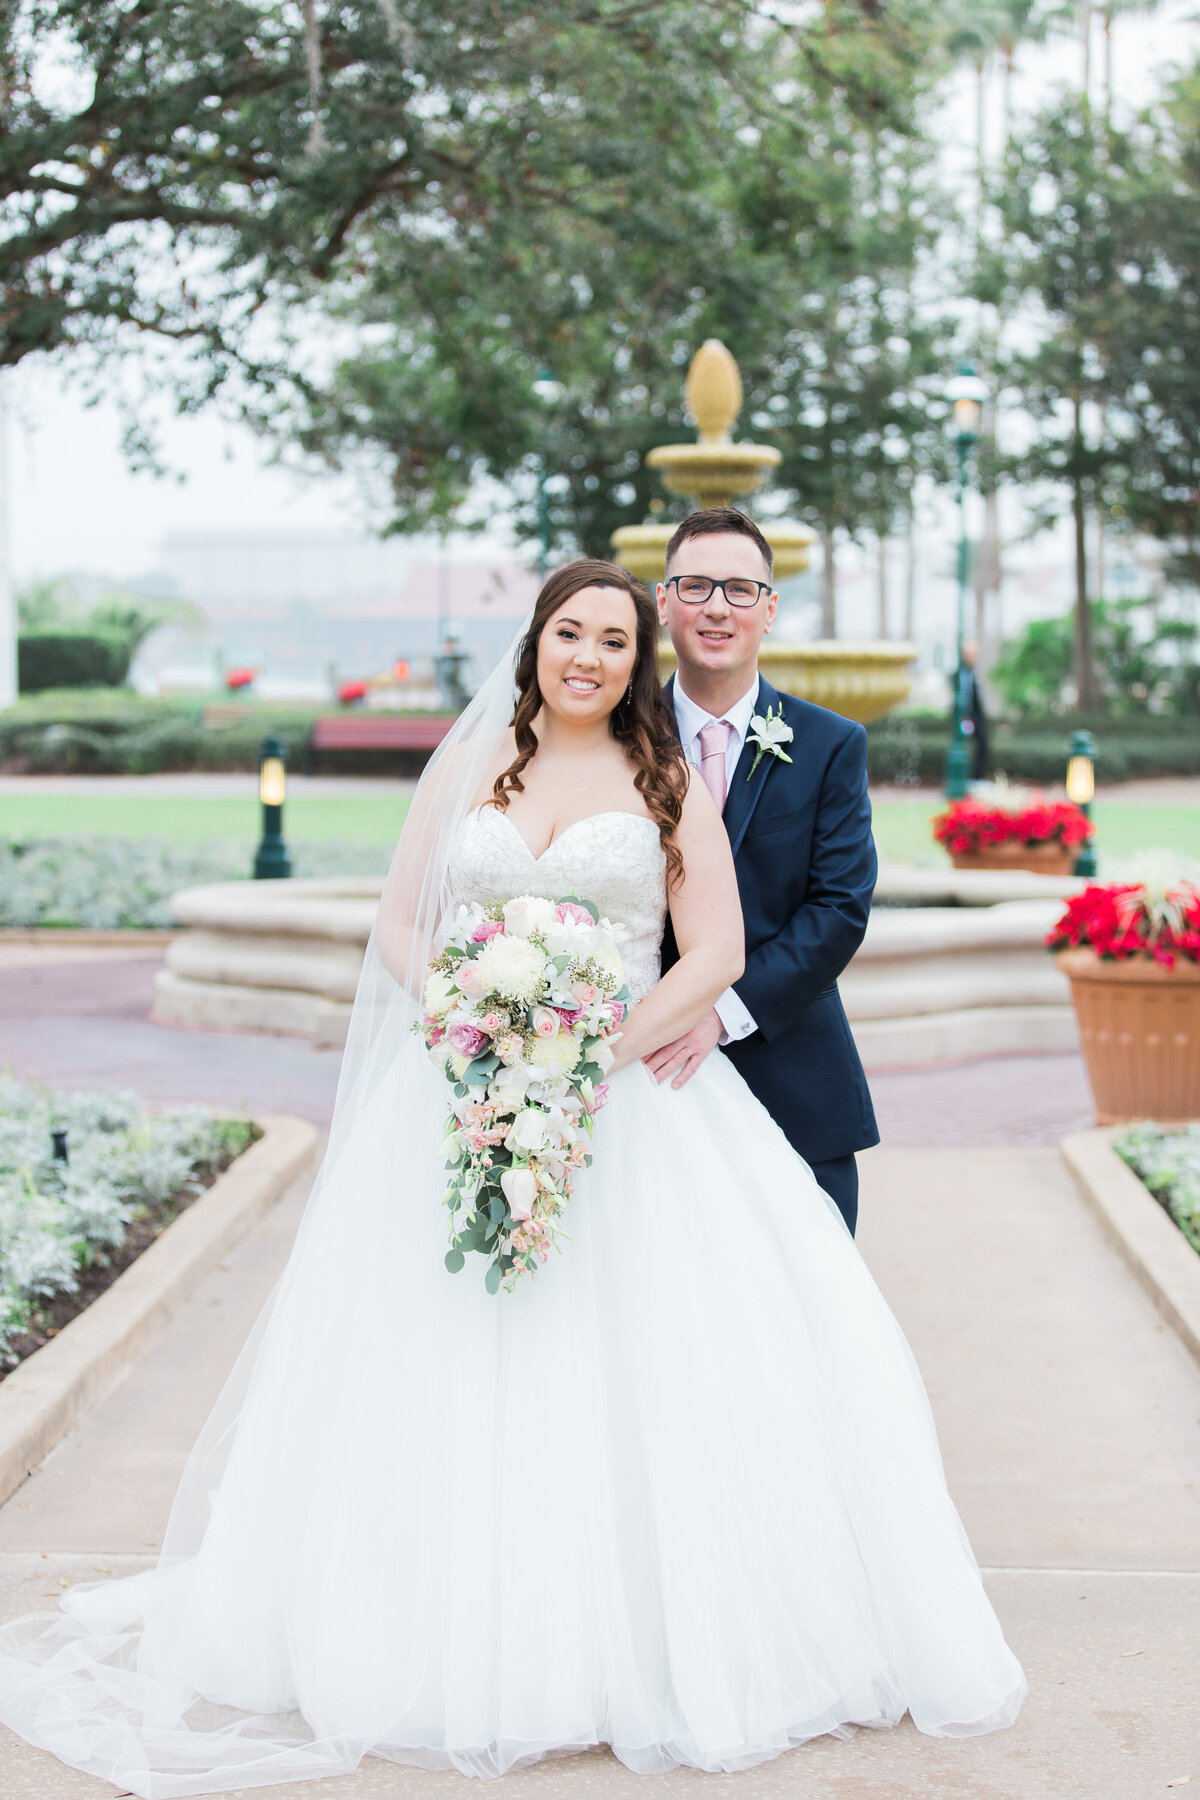 Couple smiling for wedding photo in Disney